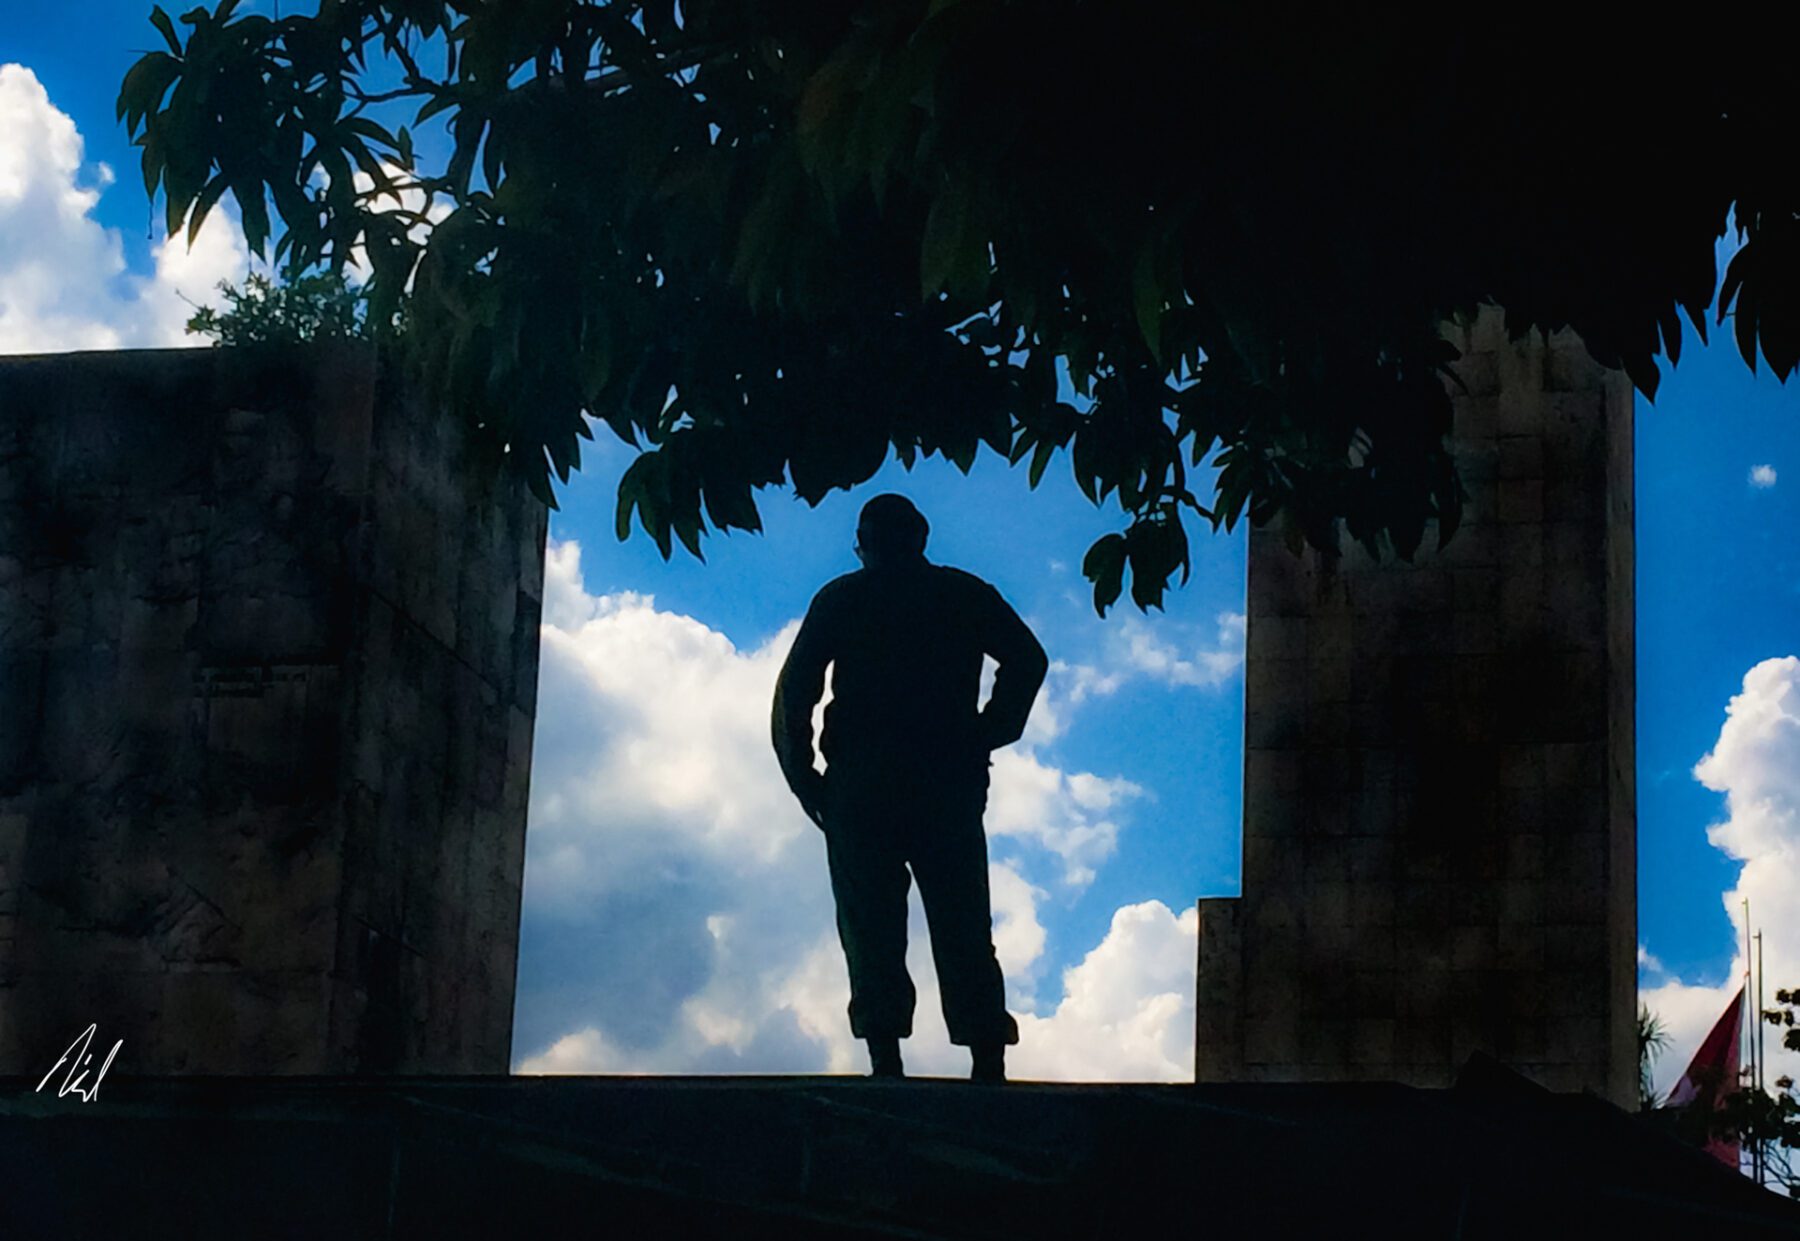 A silhouette of a man standing under a Cuba tree.